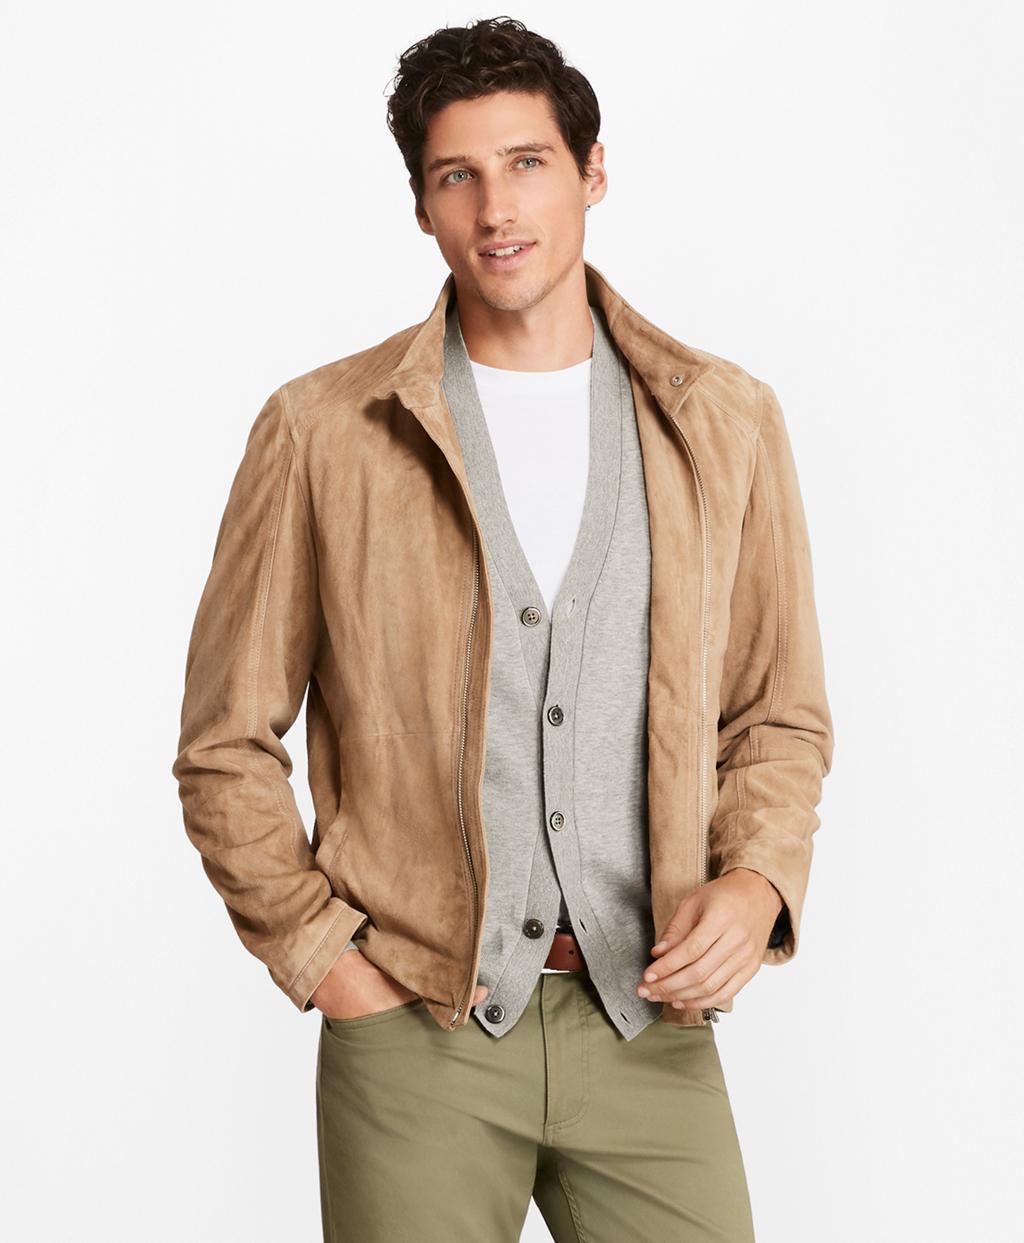 Brooks Brothers Suede Bomber Jacket in Khaki (Natural) for Men - Lyst